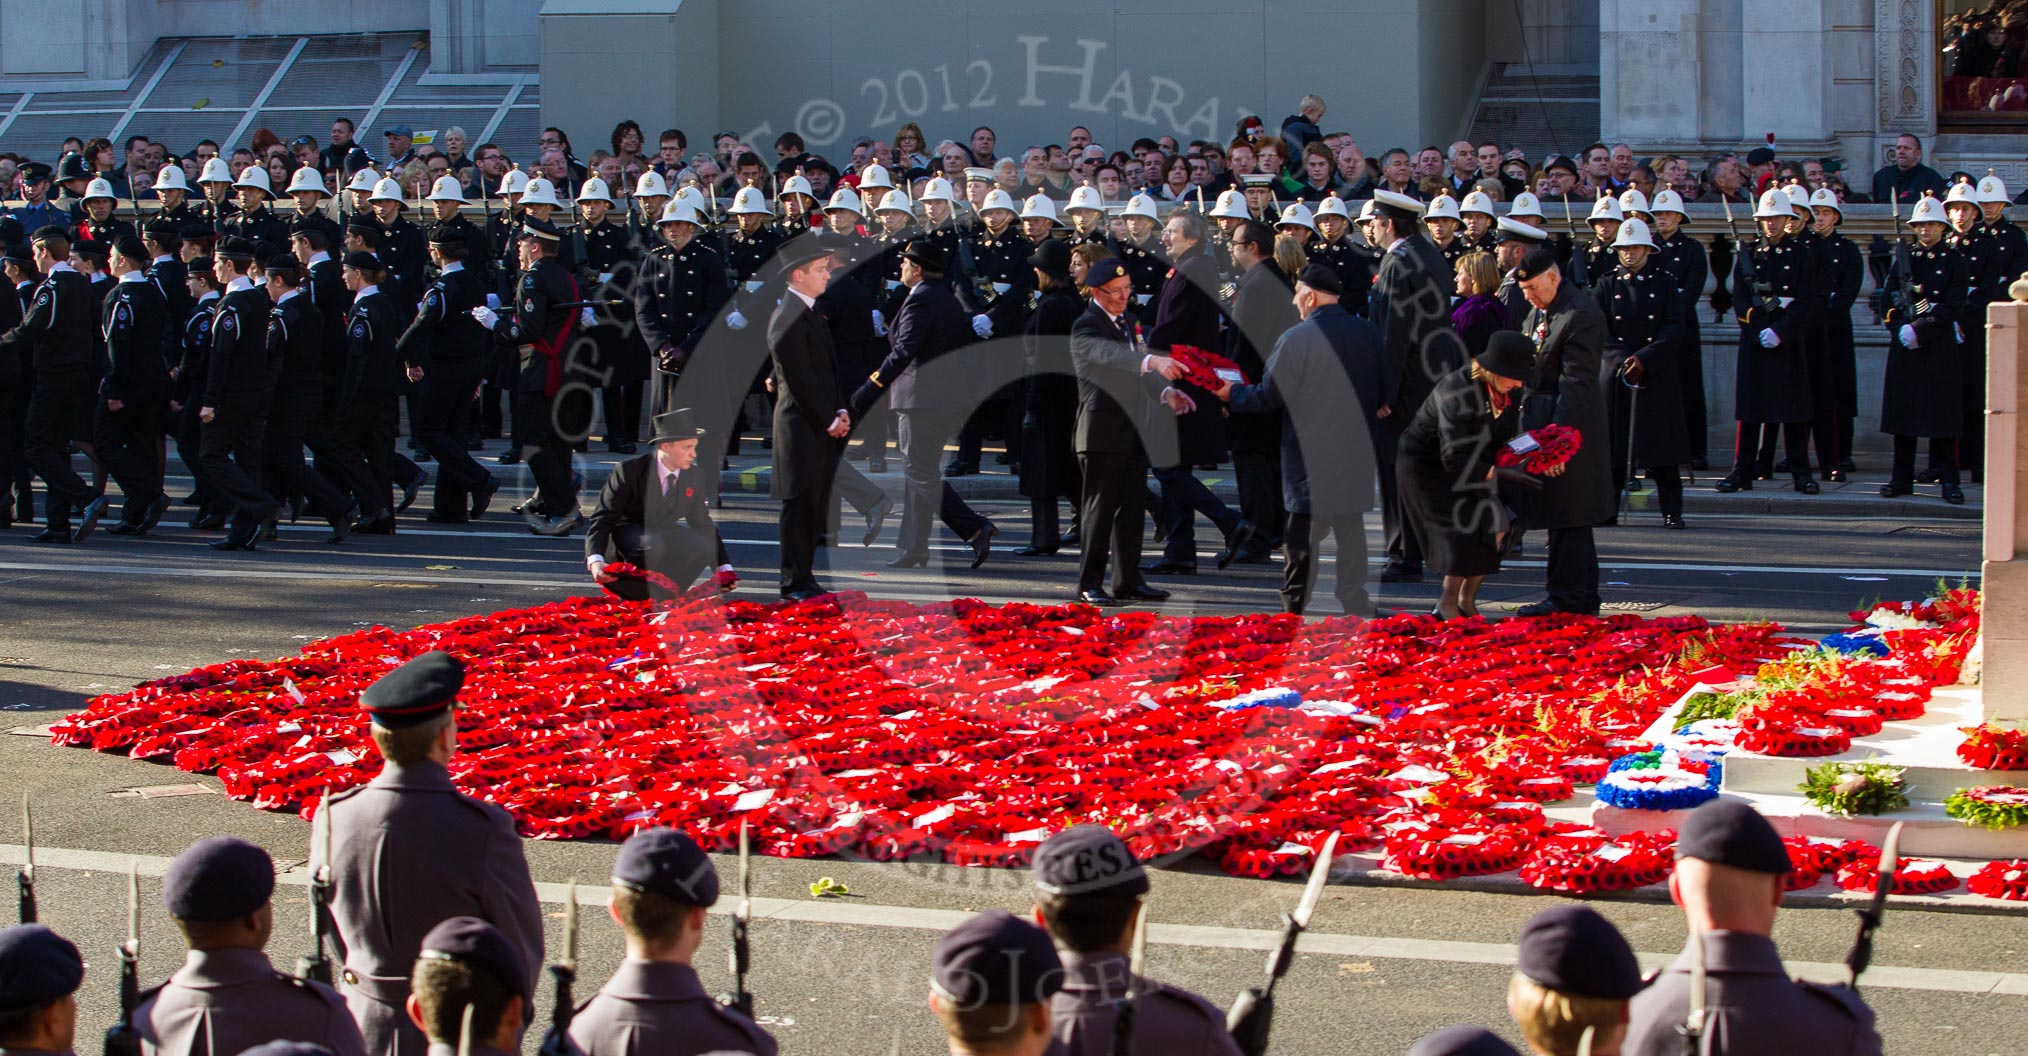 Remembrance Sunday 2012 Cenotaph March Past: Laying the last of the hundreds of wreaths from the March Past on the western side of the Cenotaph..
Whitehall, Cenotaph,
London SW1,

United Kingdom,
on 11 November 2012 at 12:16, image #1775